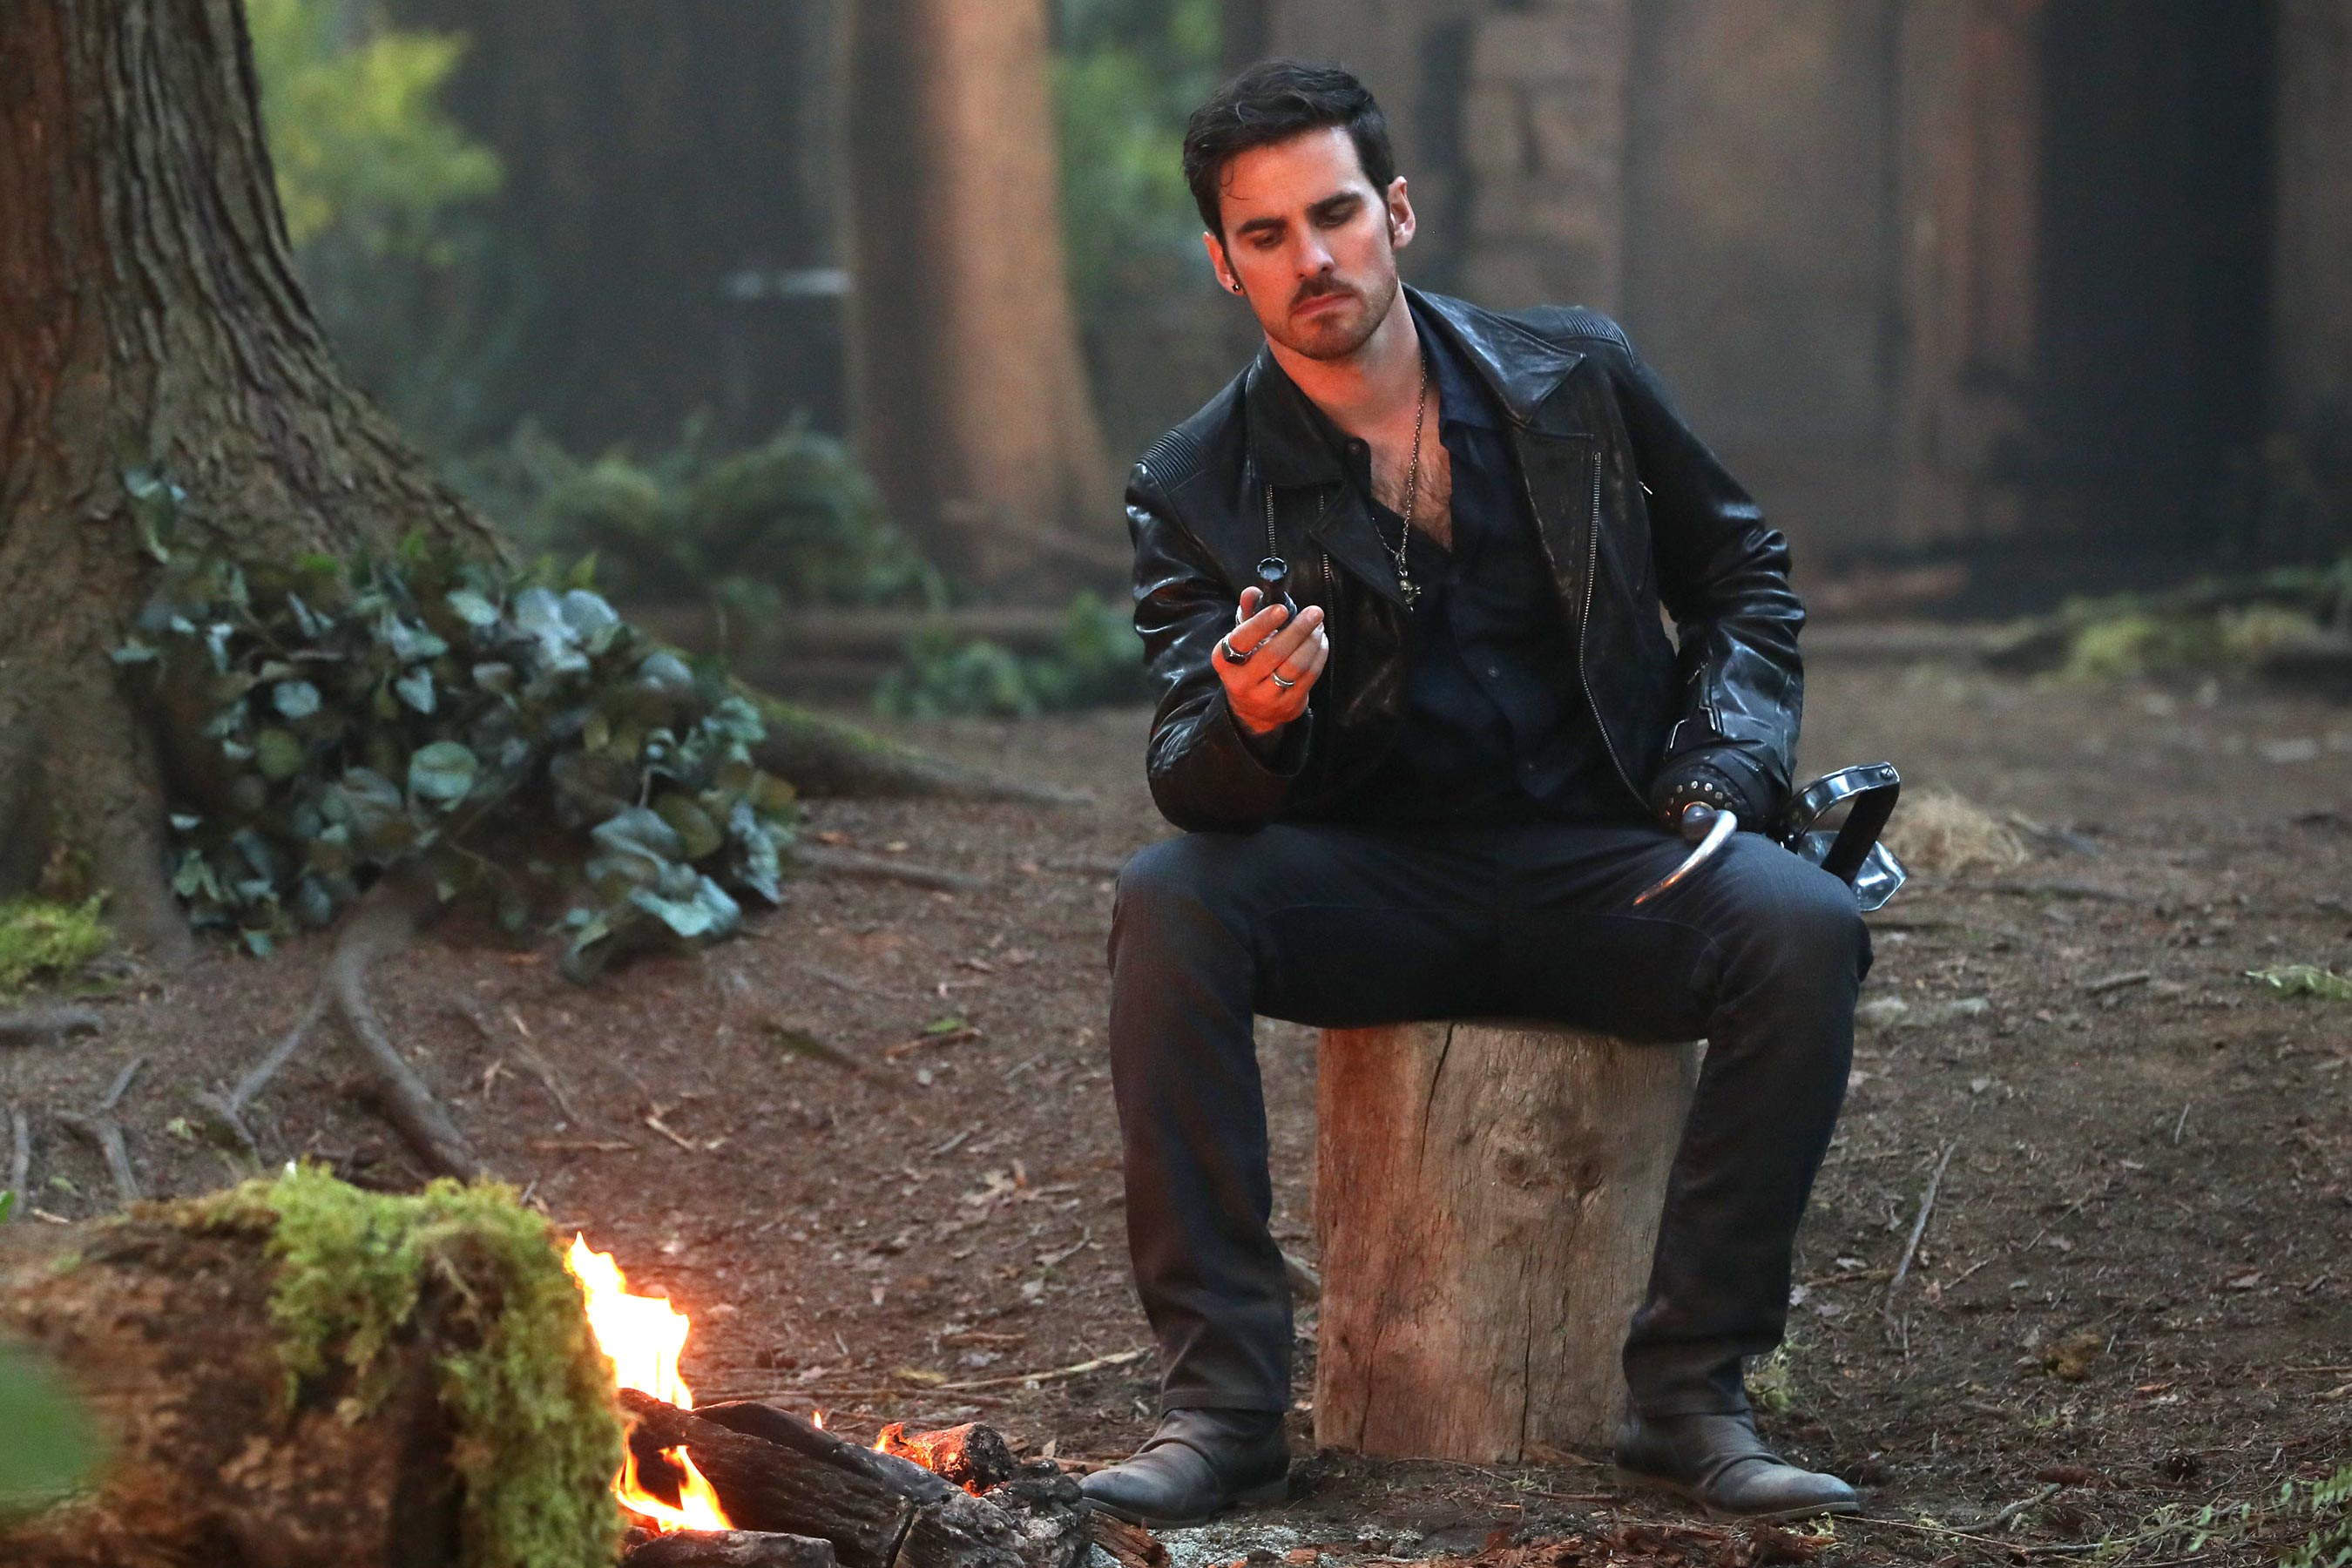 once upon a time season 2 download bittorrent